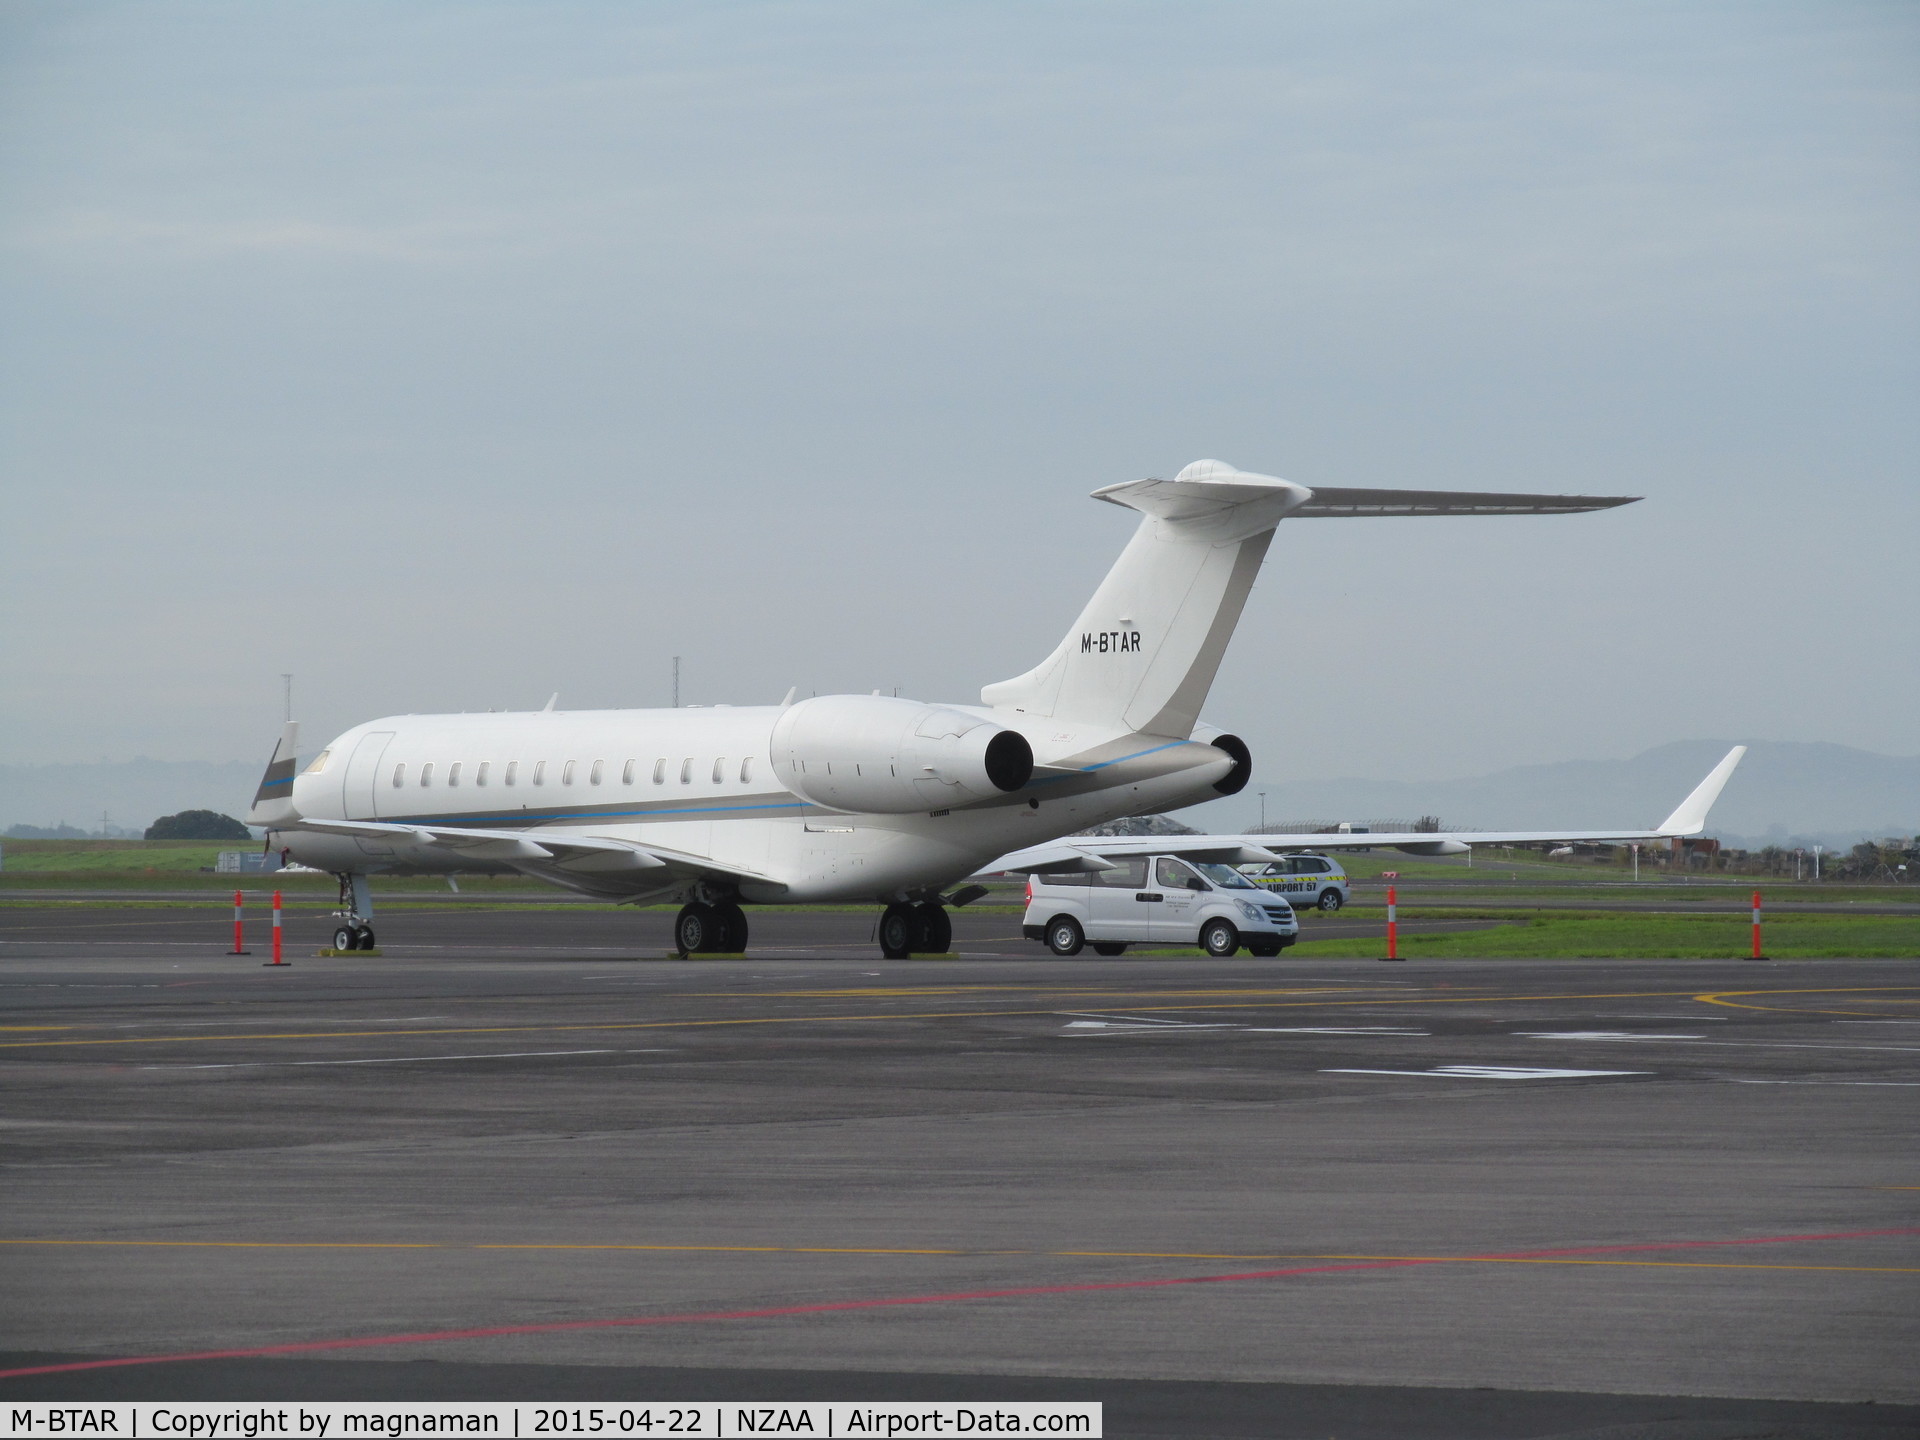 M-BTAR, 2007 Bombardier BD-700-1A10 Global Express C/N 9250, view from domestic car park across apron